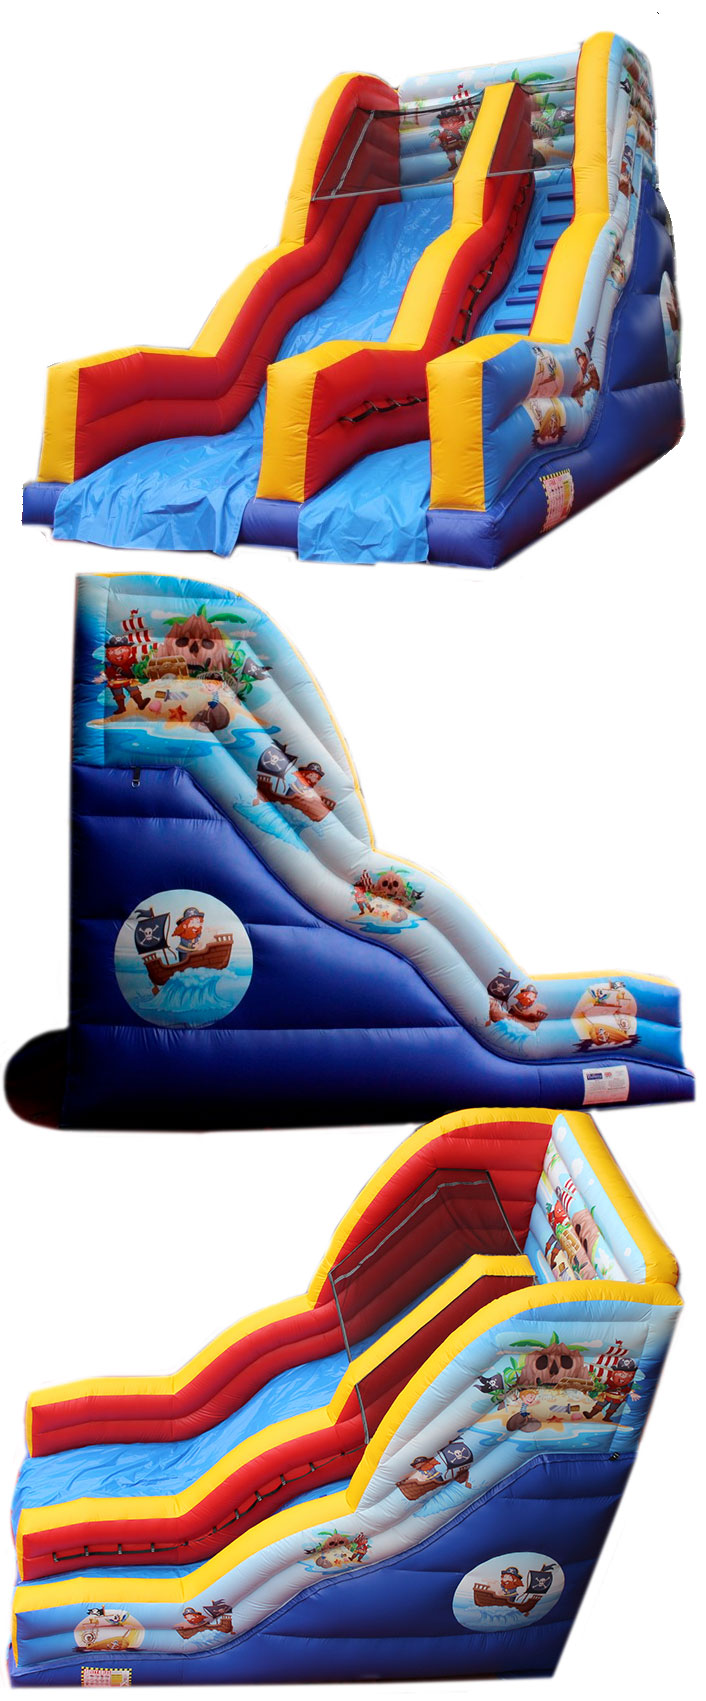 Bouncy Castle Sales - BC452 - Bouncy Inflatable